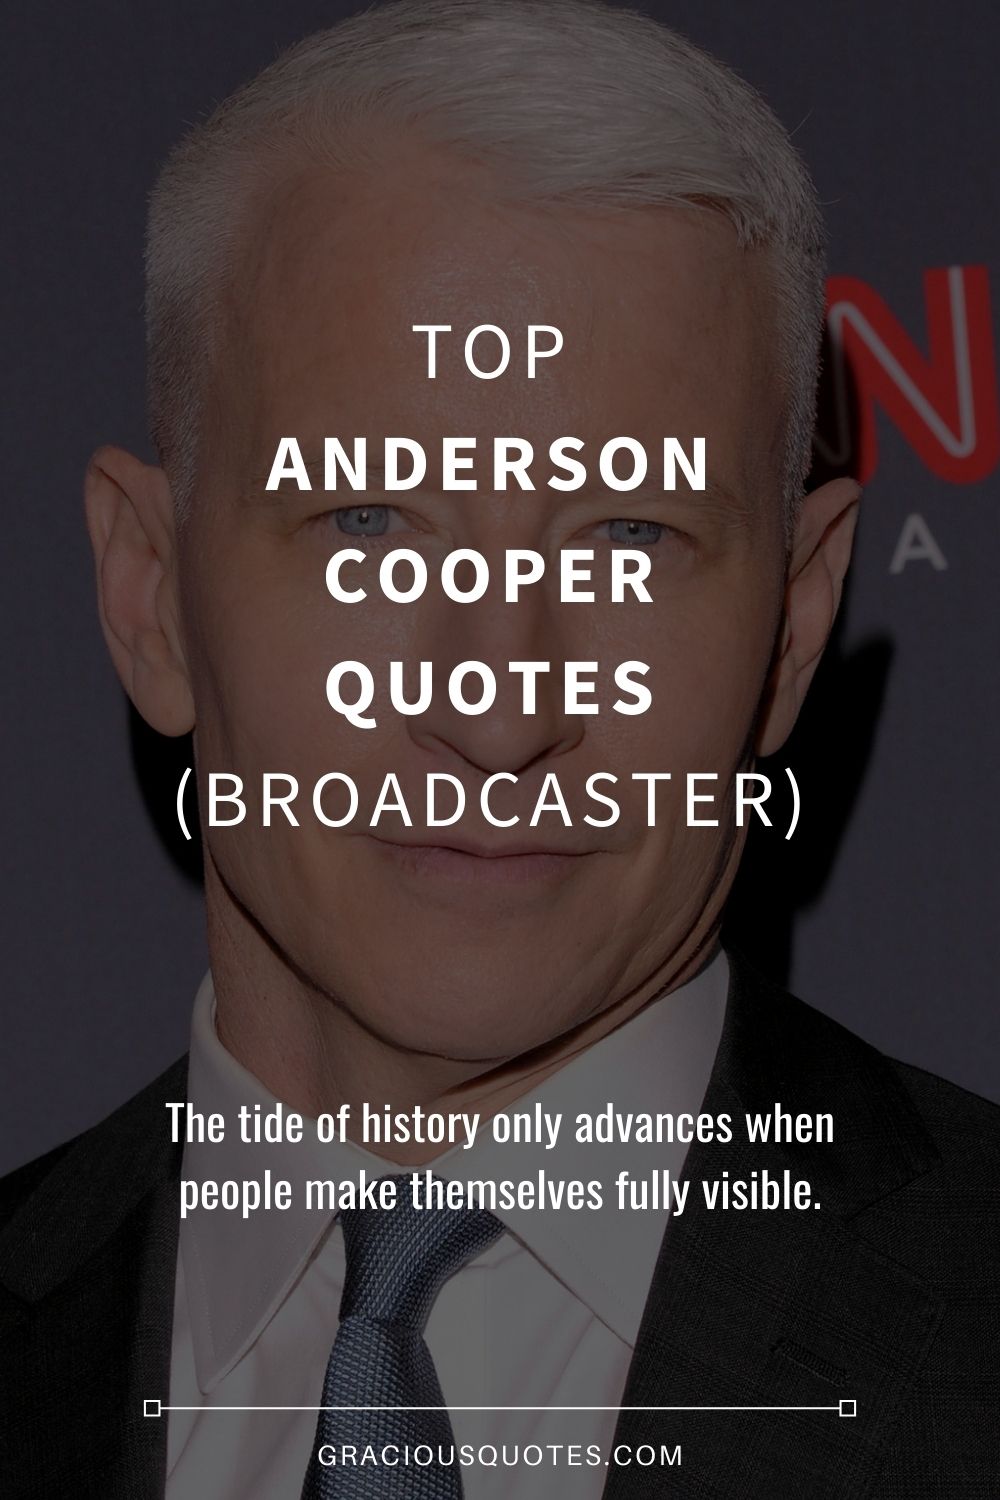 Top Anderson Cooper Quotes (BROADCASTER) - Gracious Quotes